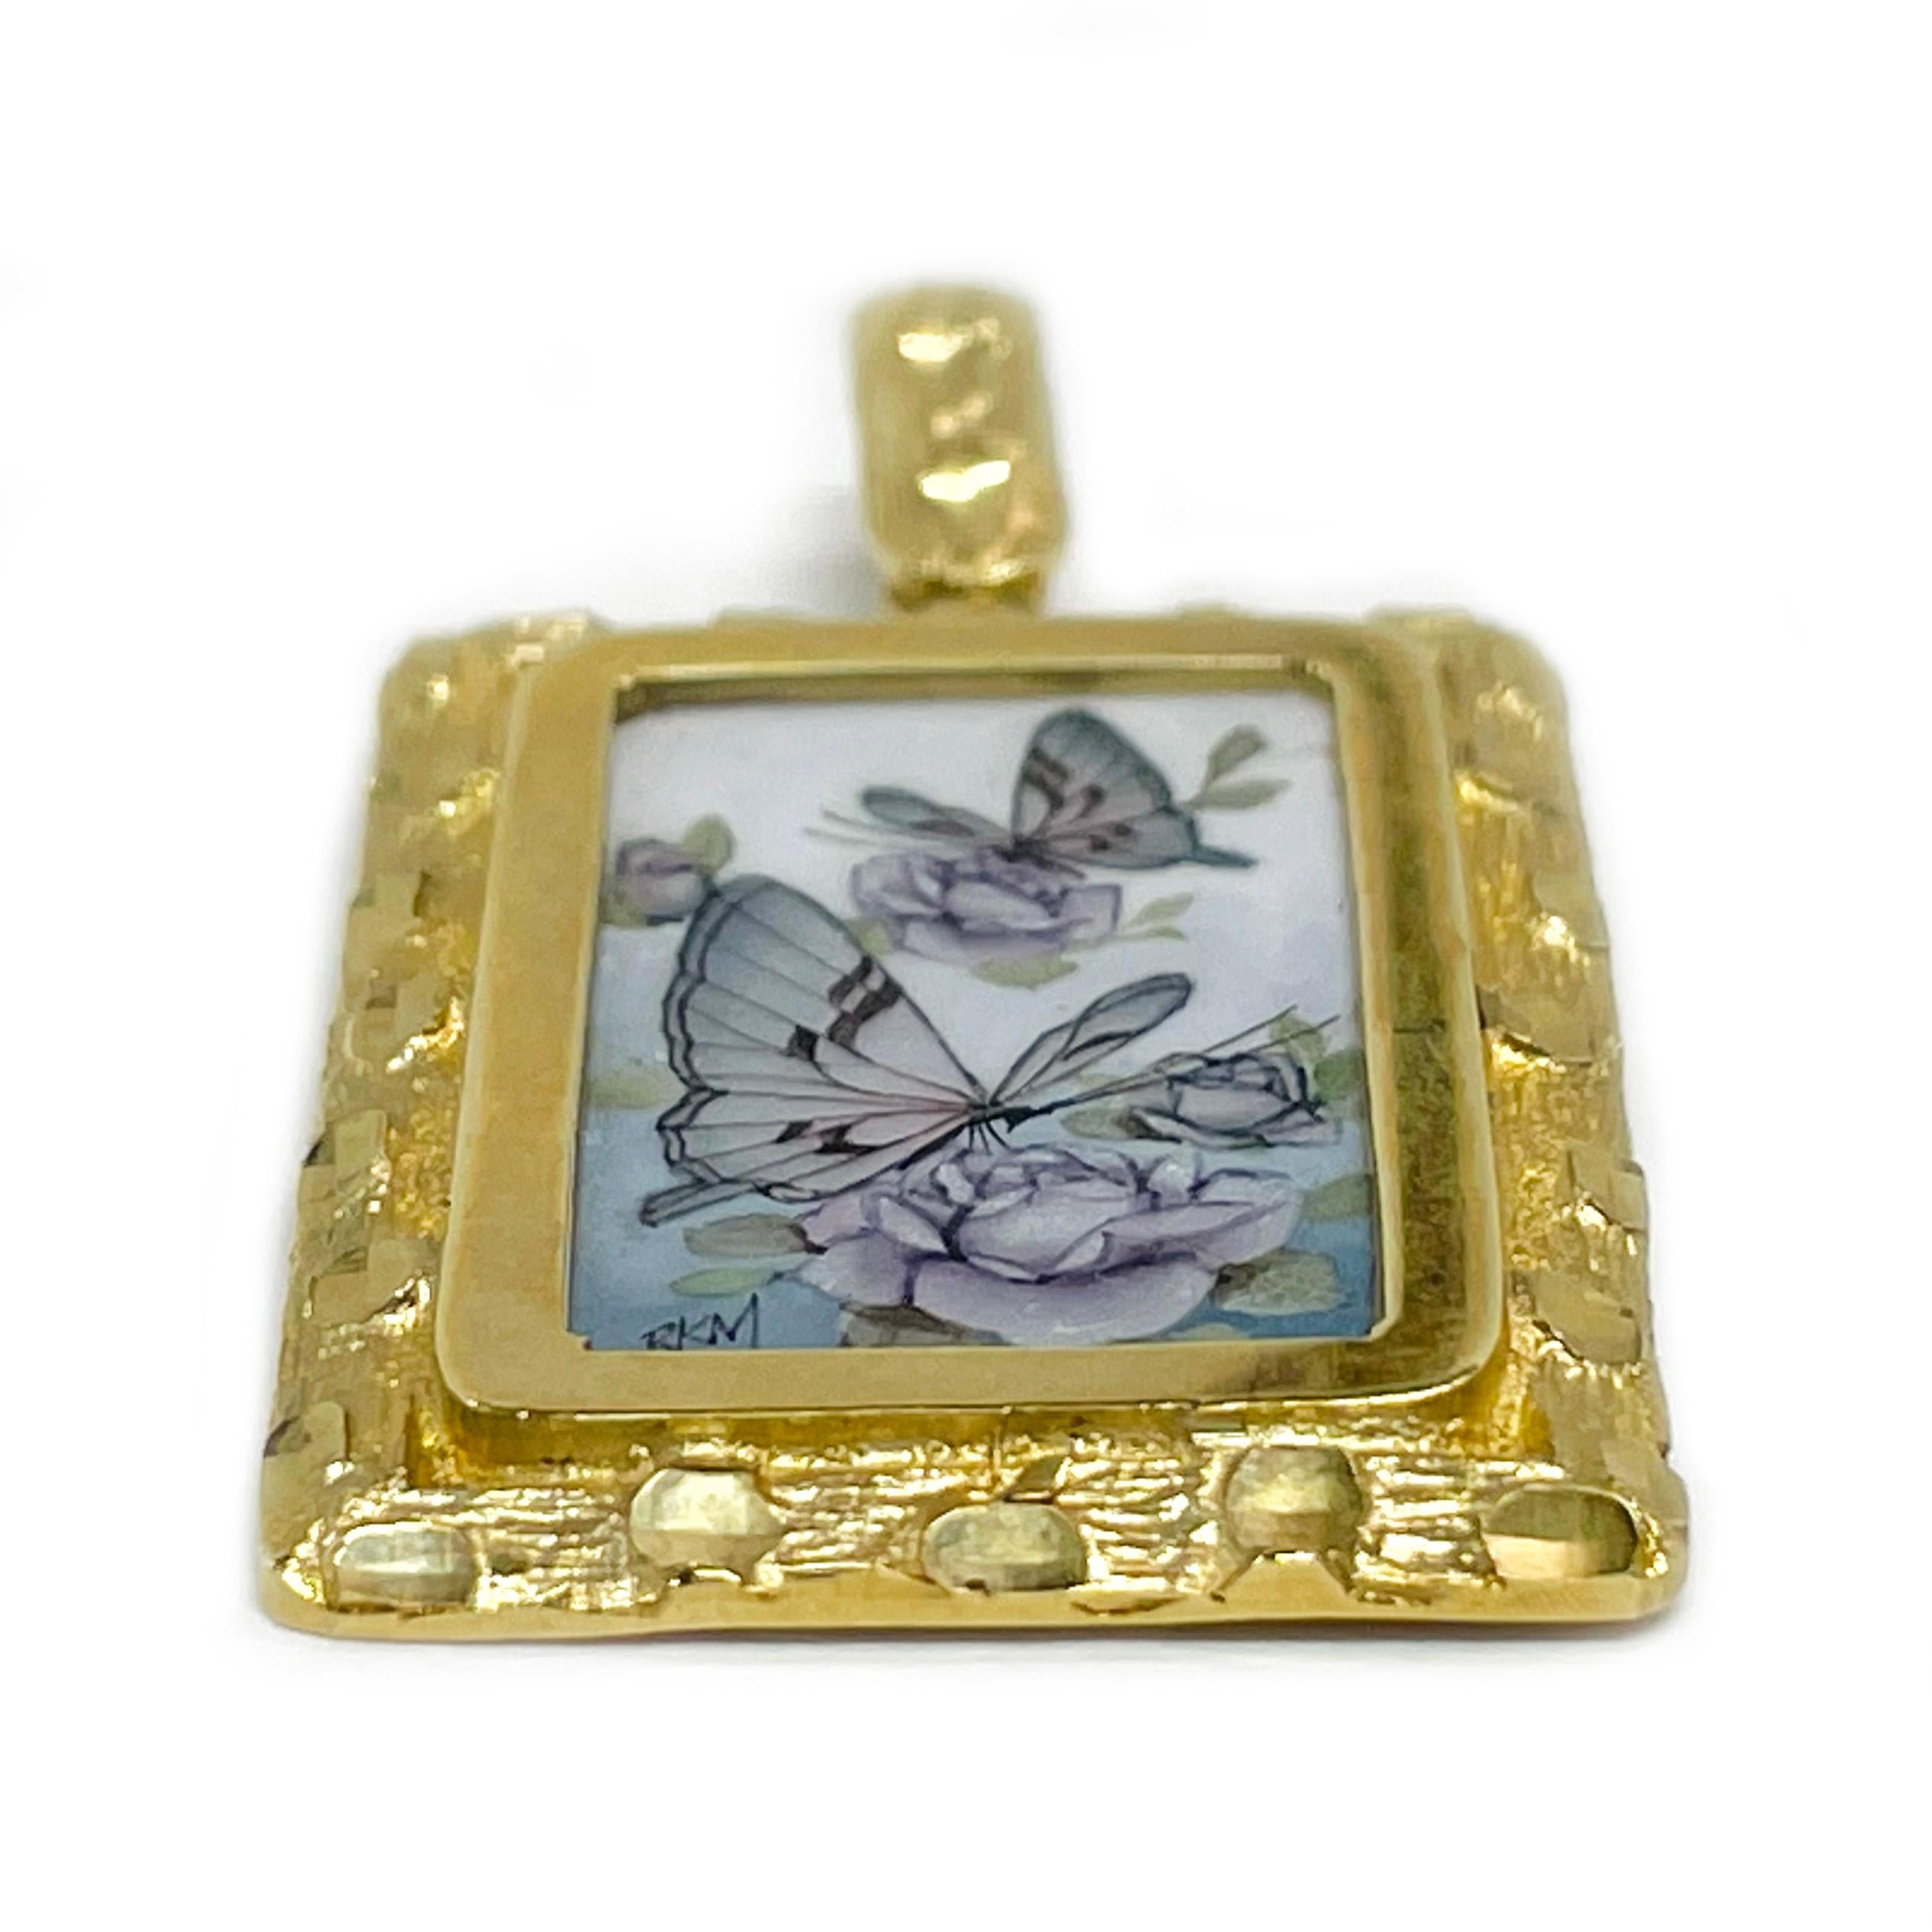 14 Karat Yellow Gold Hand Painted Butterflies and Roses on Mother of Pearl Pendant. Absolutely lovely butterflies and blue lavender roses painting. The miniature painting is set in a 14 karat gold rectangular frame with diamond-cut details. The